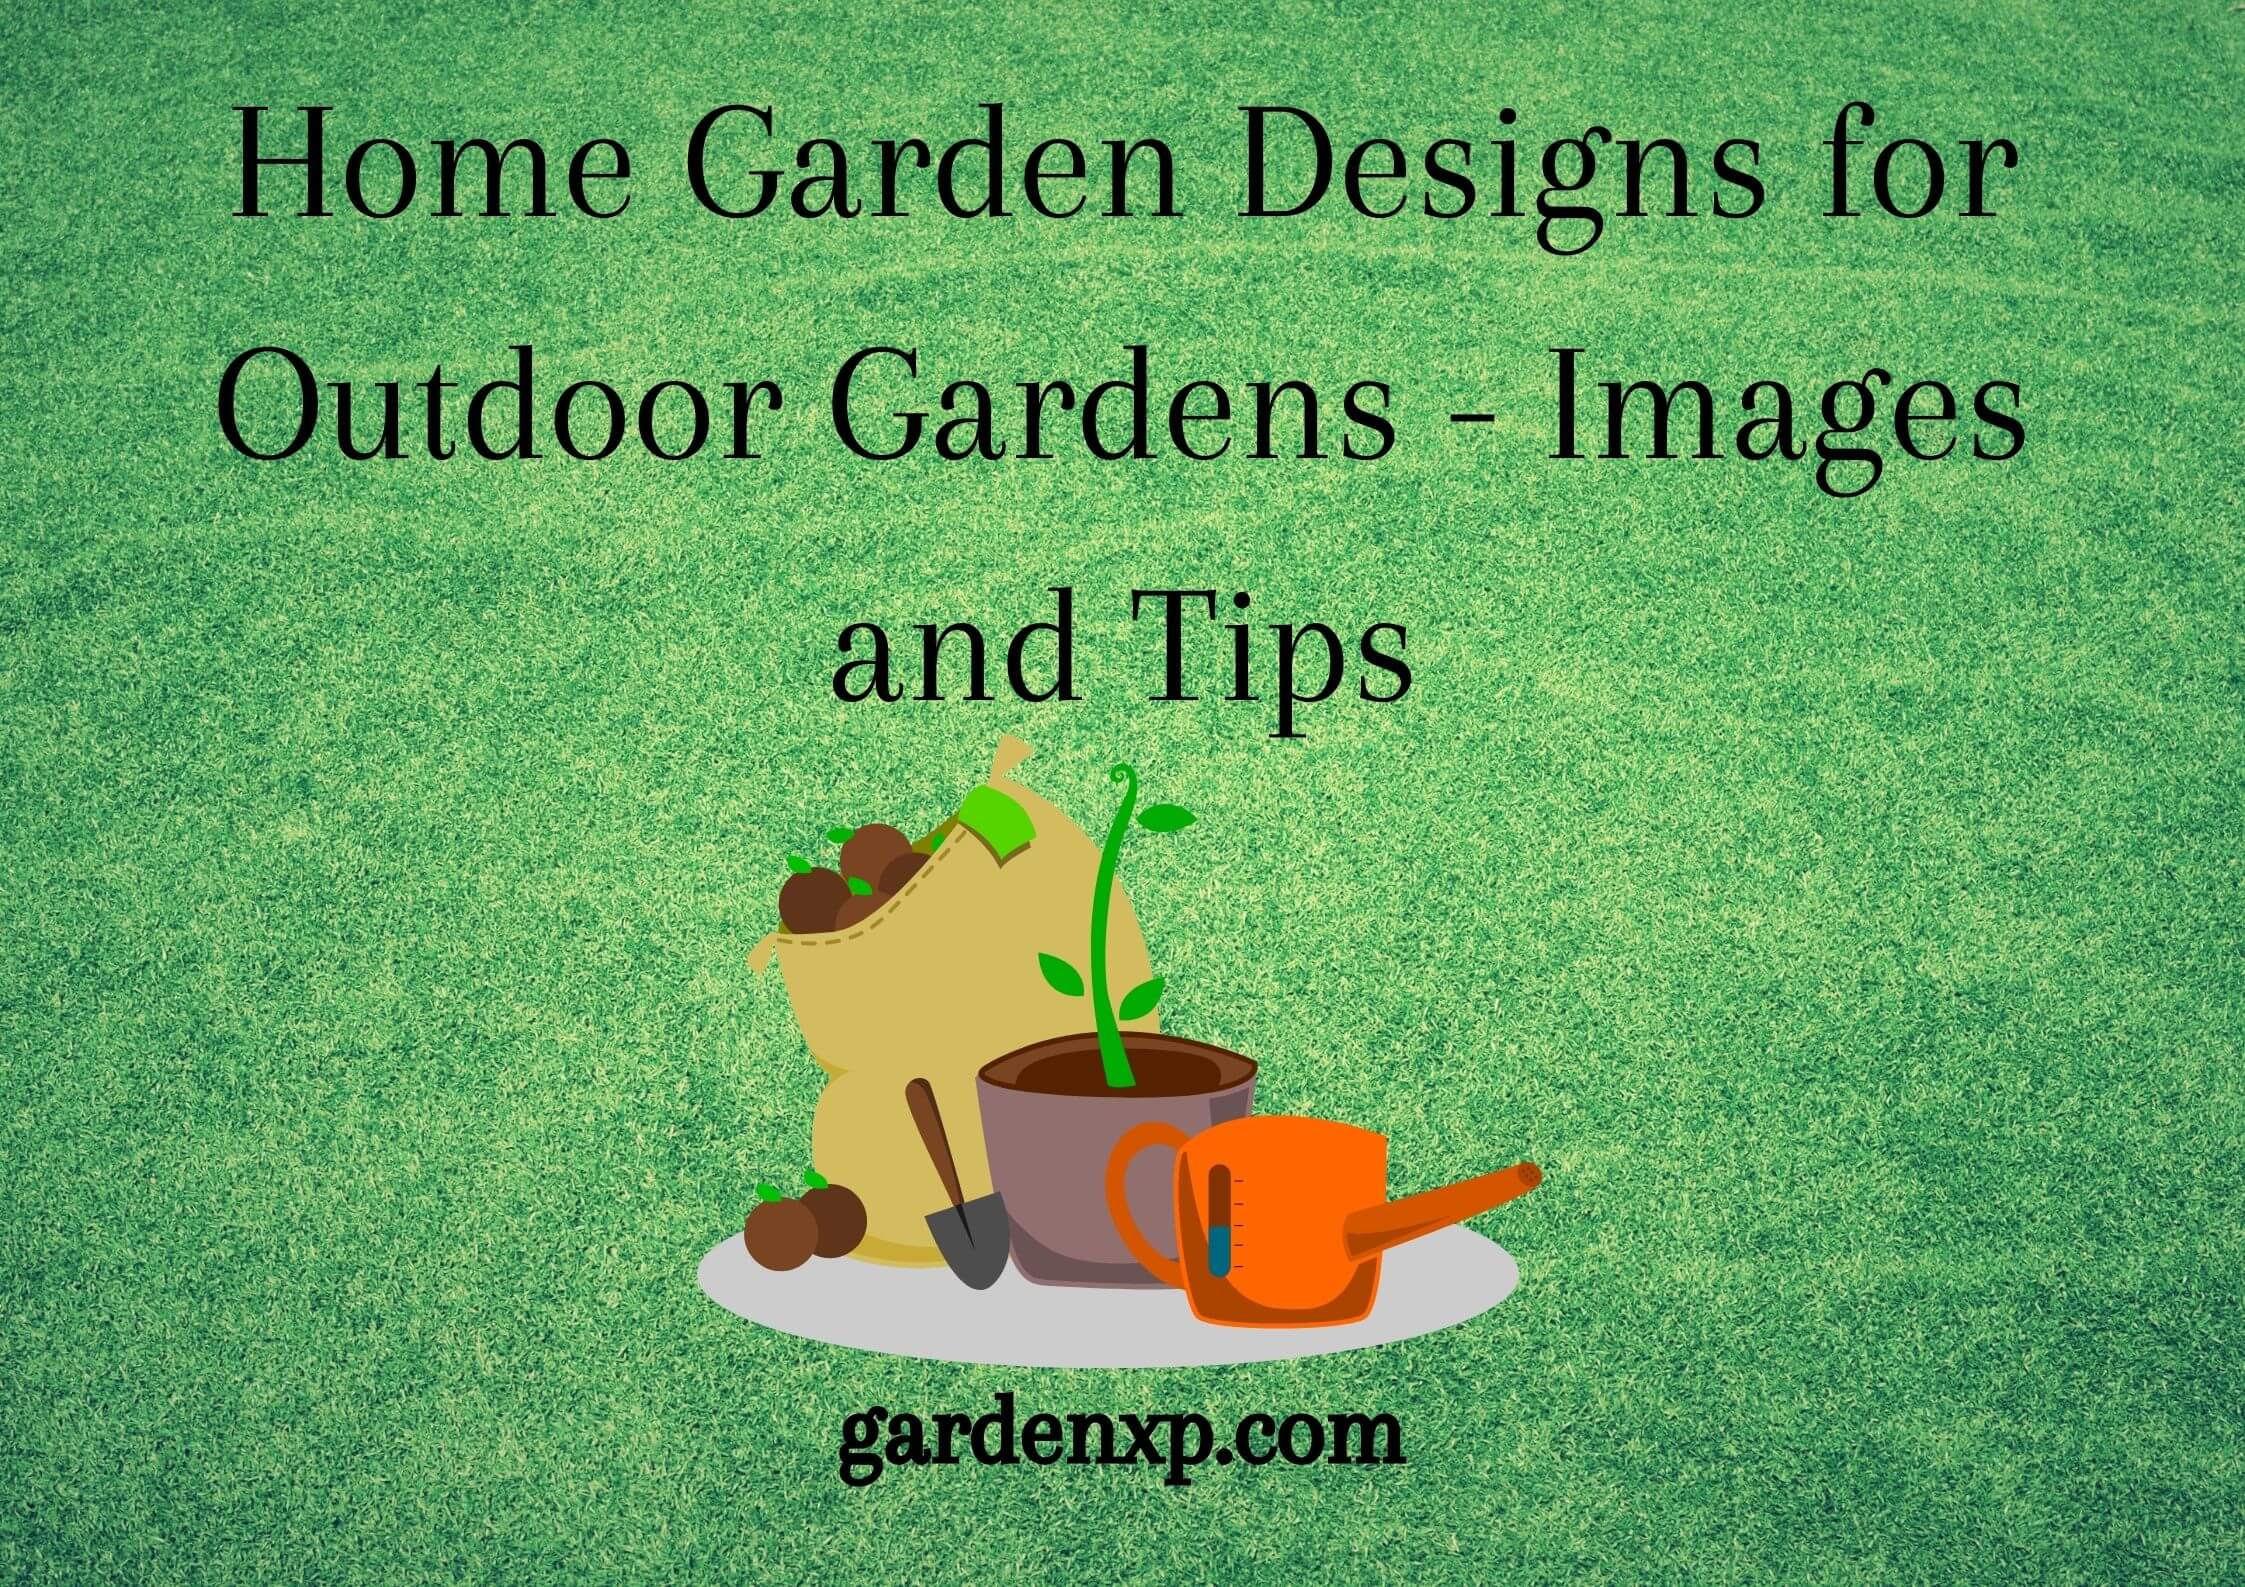 <strong>Home Garden Designs for Outdoor Gardens - Images and Tips</strong>